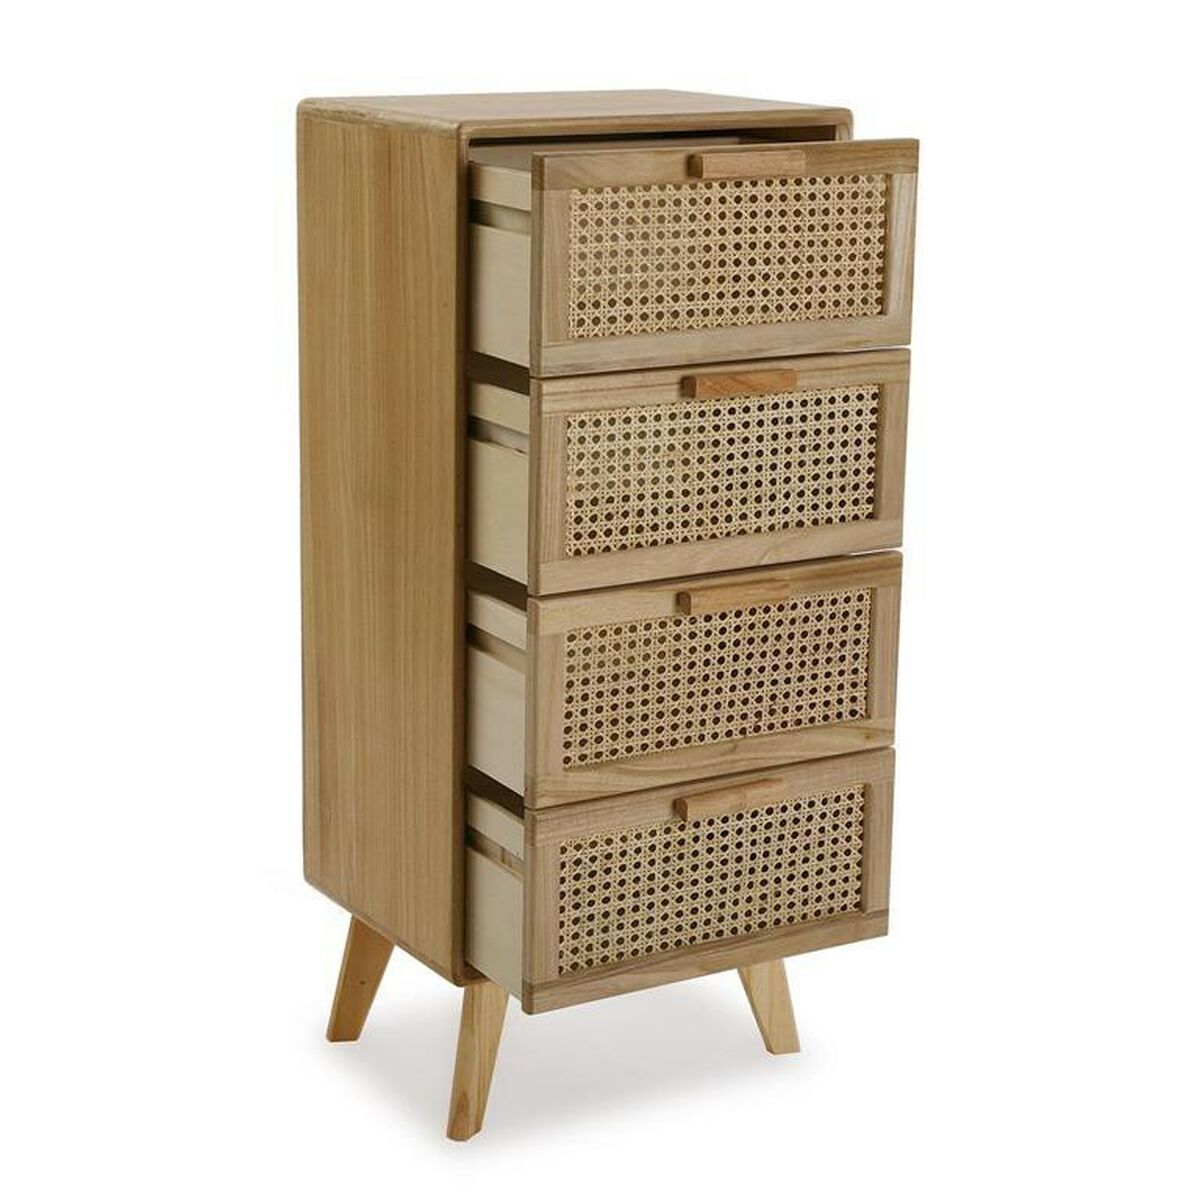 Chest of drawers in wood and Rattan (30 x 90 x 40 cm)